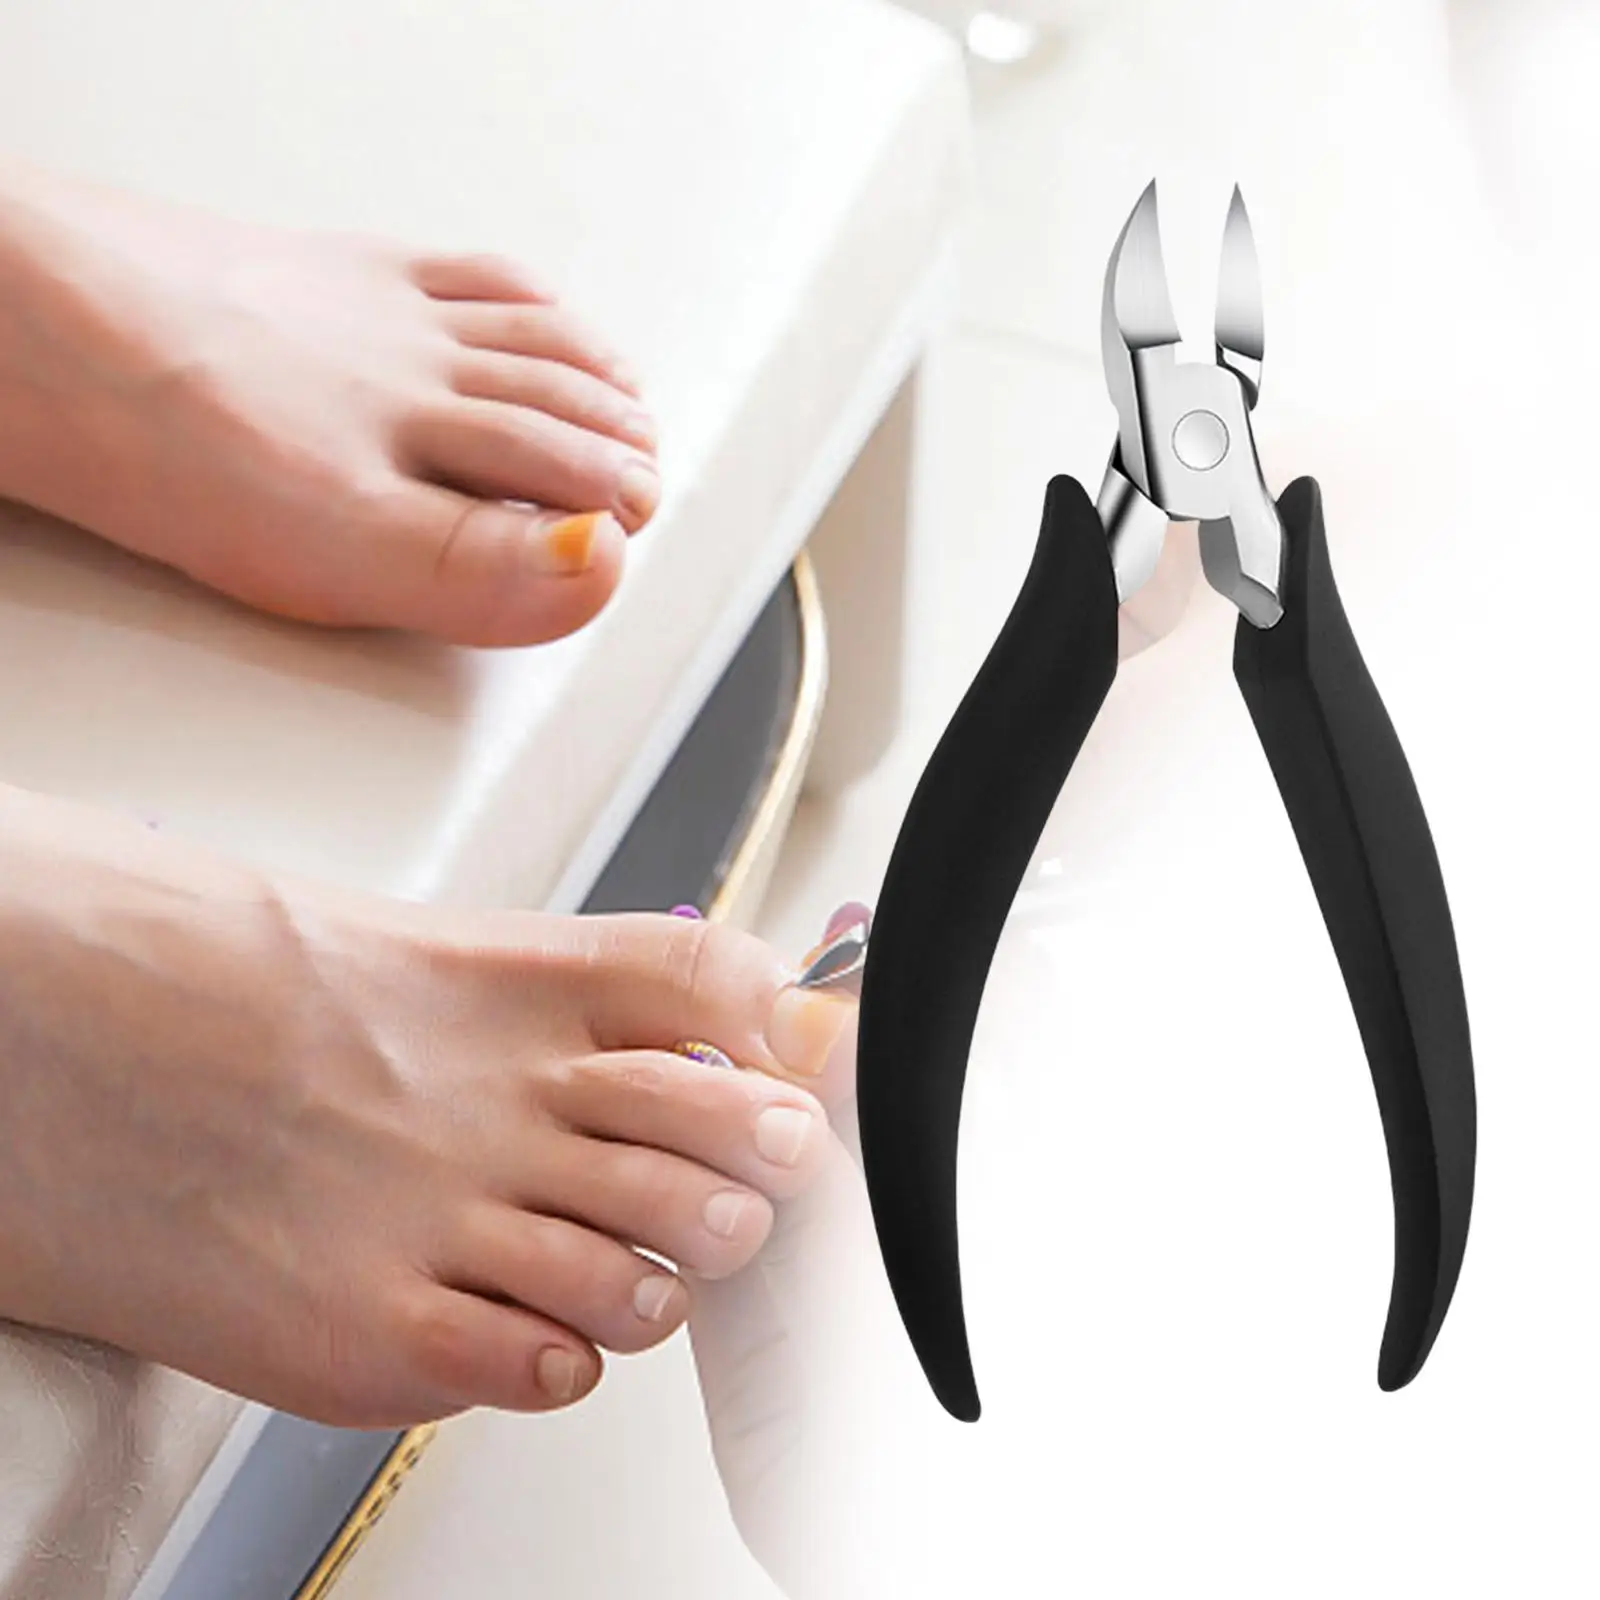 Toe Nail Steel Cuticle with Advanced Precision Easily Grip and Control